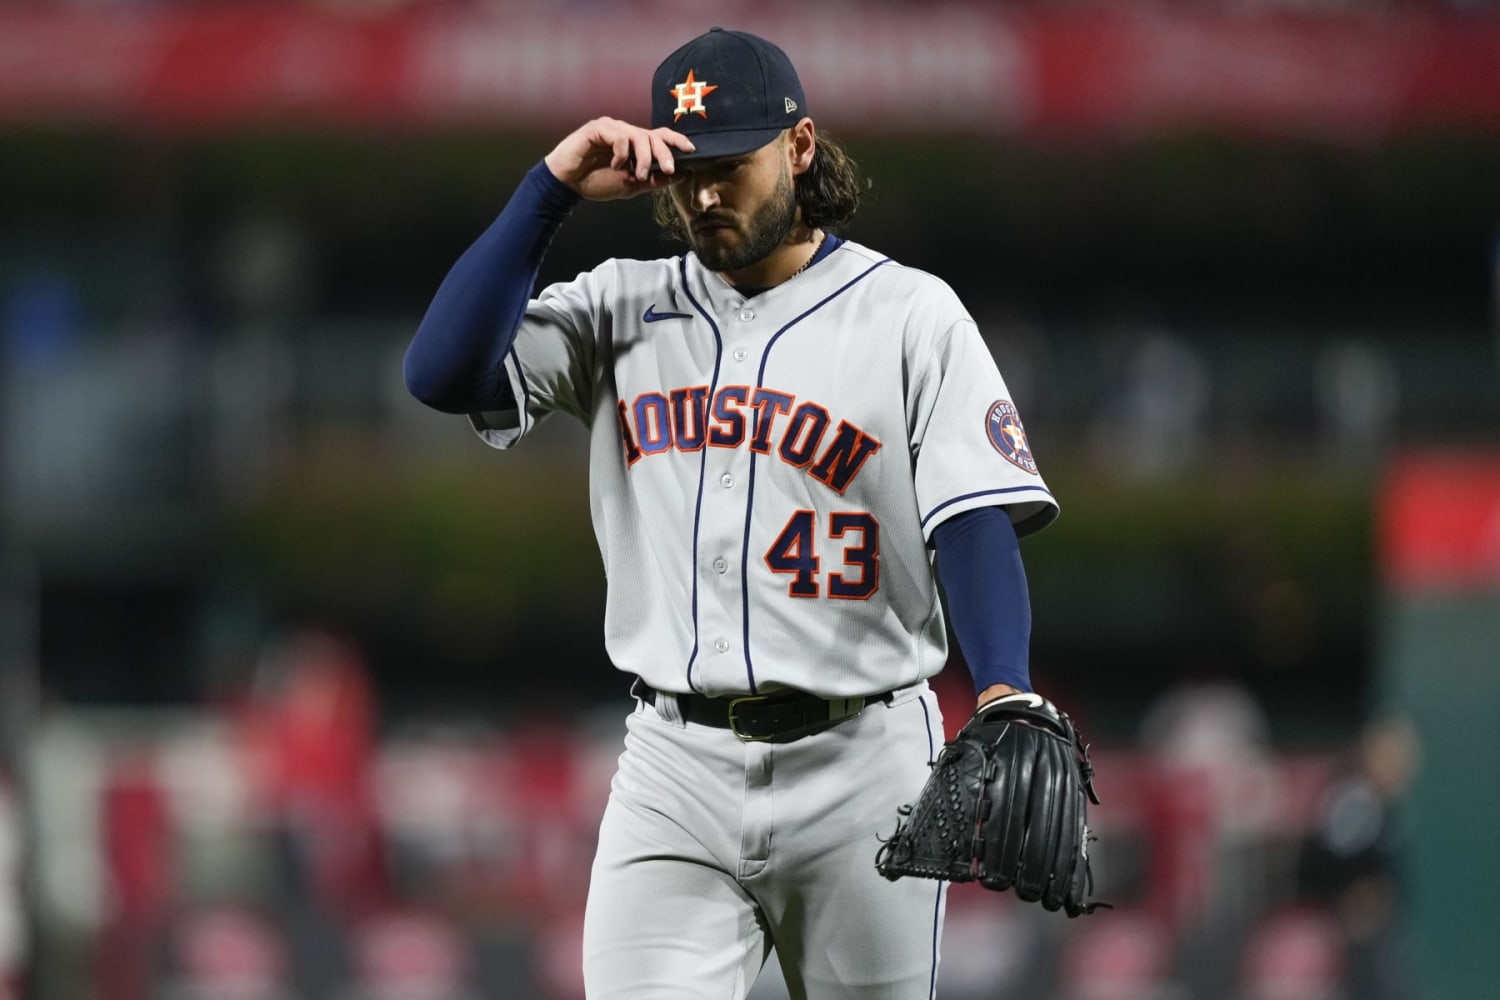 All-Star pitcher Lance McCullers Jr. agrees to $85M extension with Astros 